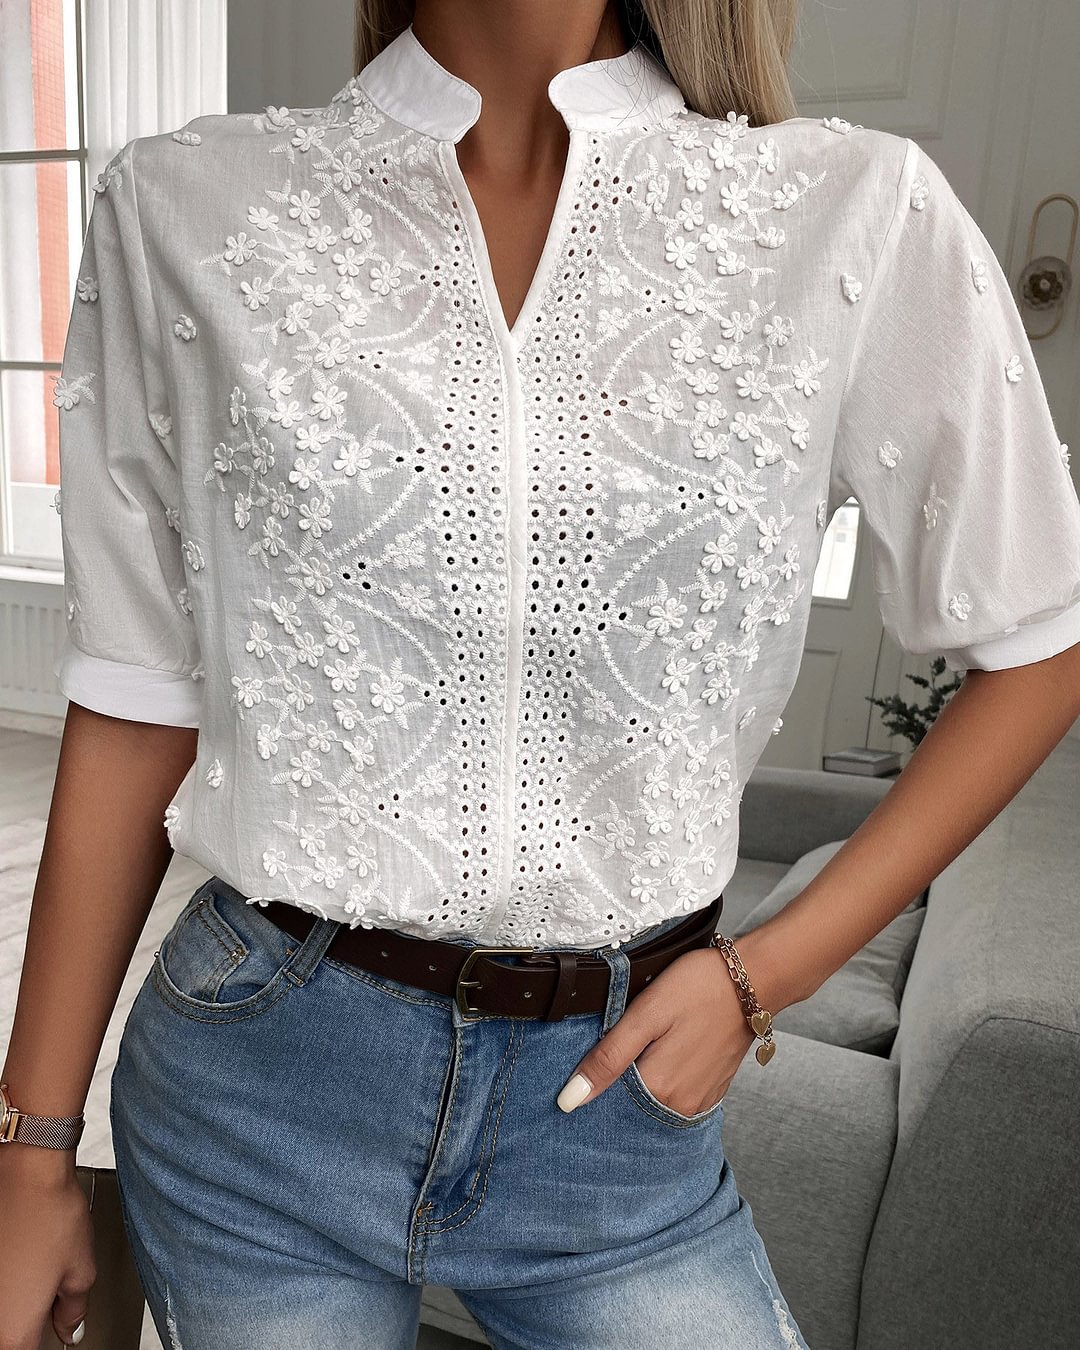 New V-Neck Stand-Neck Embroidered Lace Top Shirt